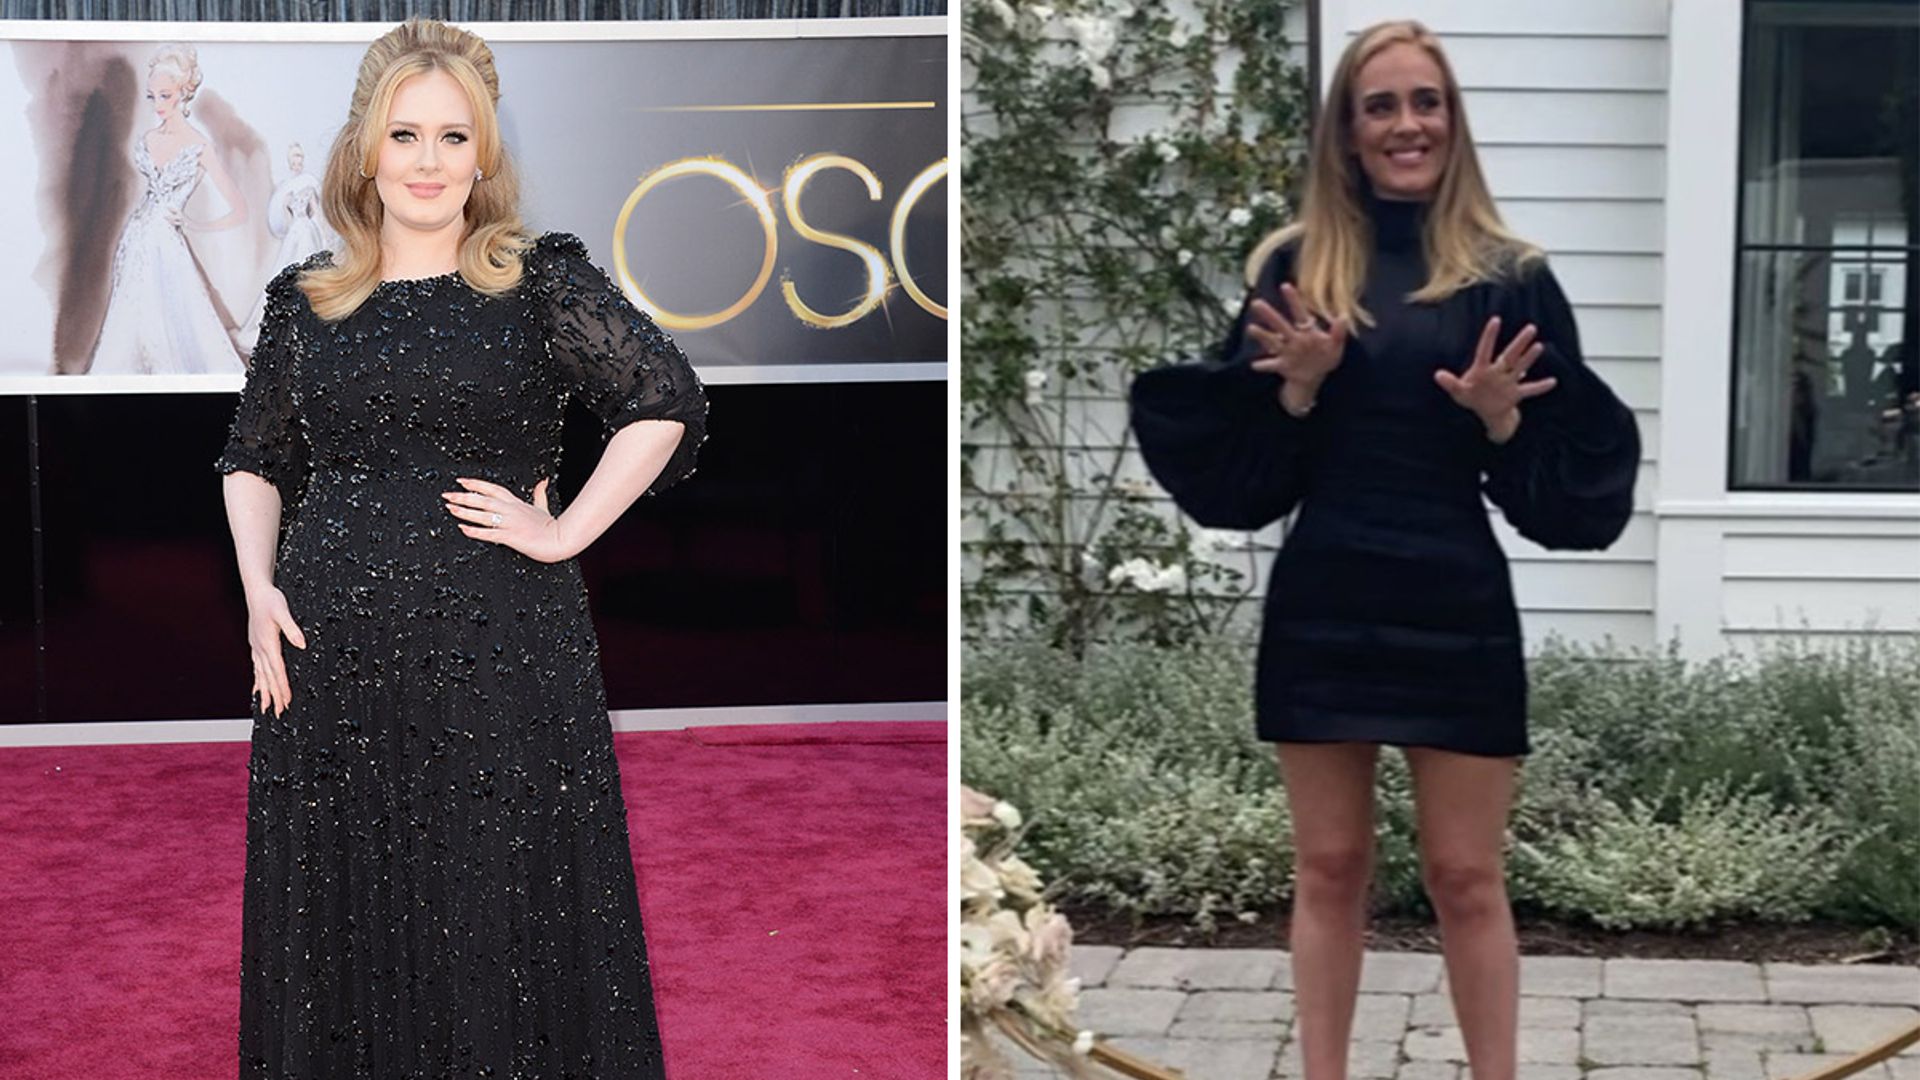 https://www.hellomagazine.com/imagenes/healthandbeauty/health-and-fitness/2020050689351/adele-staggering-weight-loss-birthday-photo/0-428-294/adele-weight-t.jpg?filter=w600